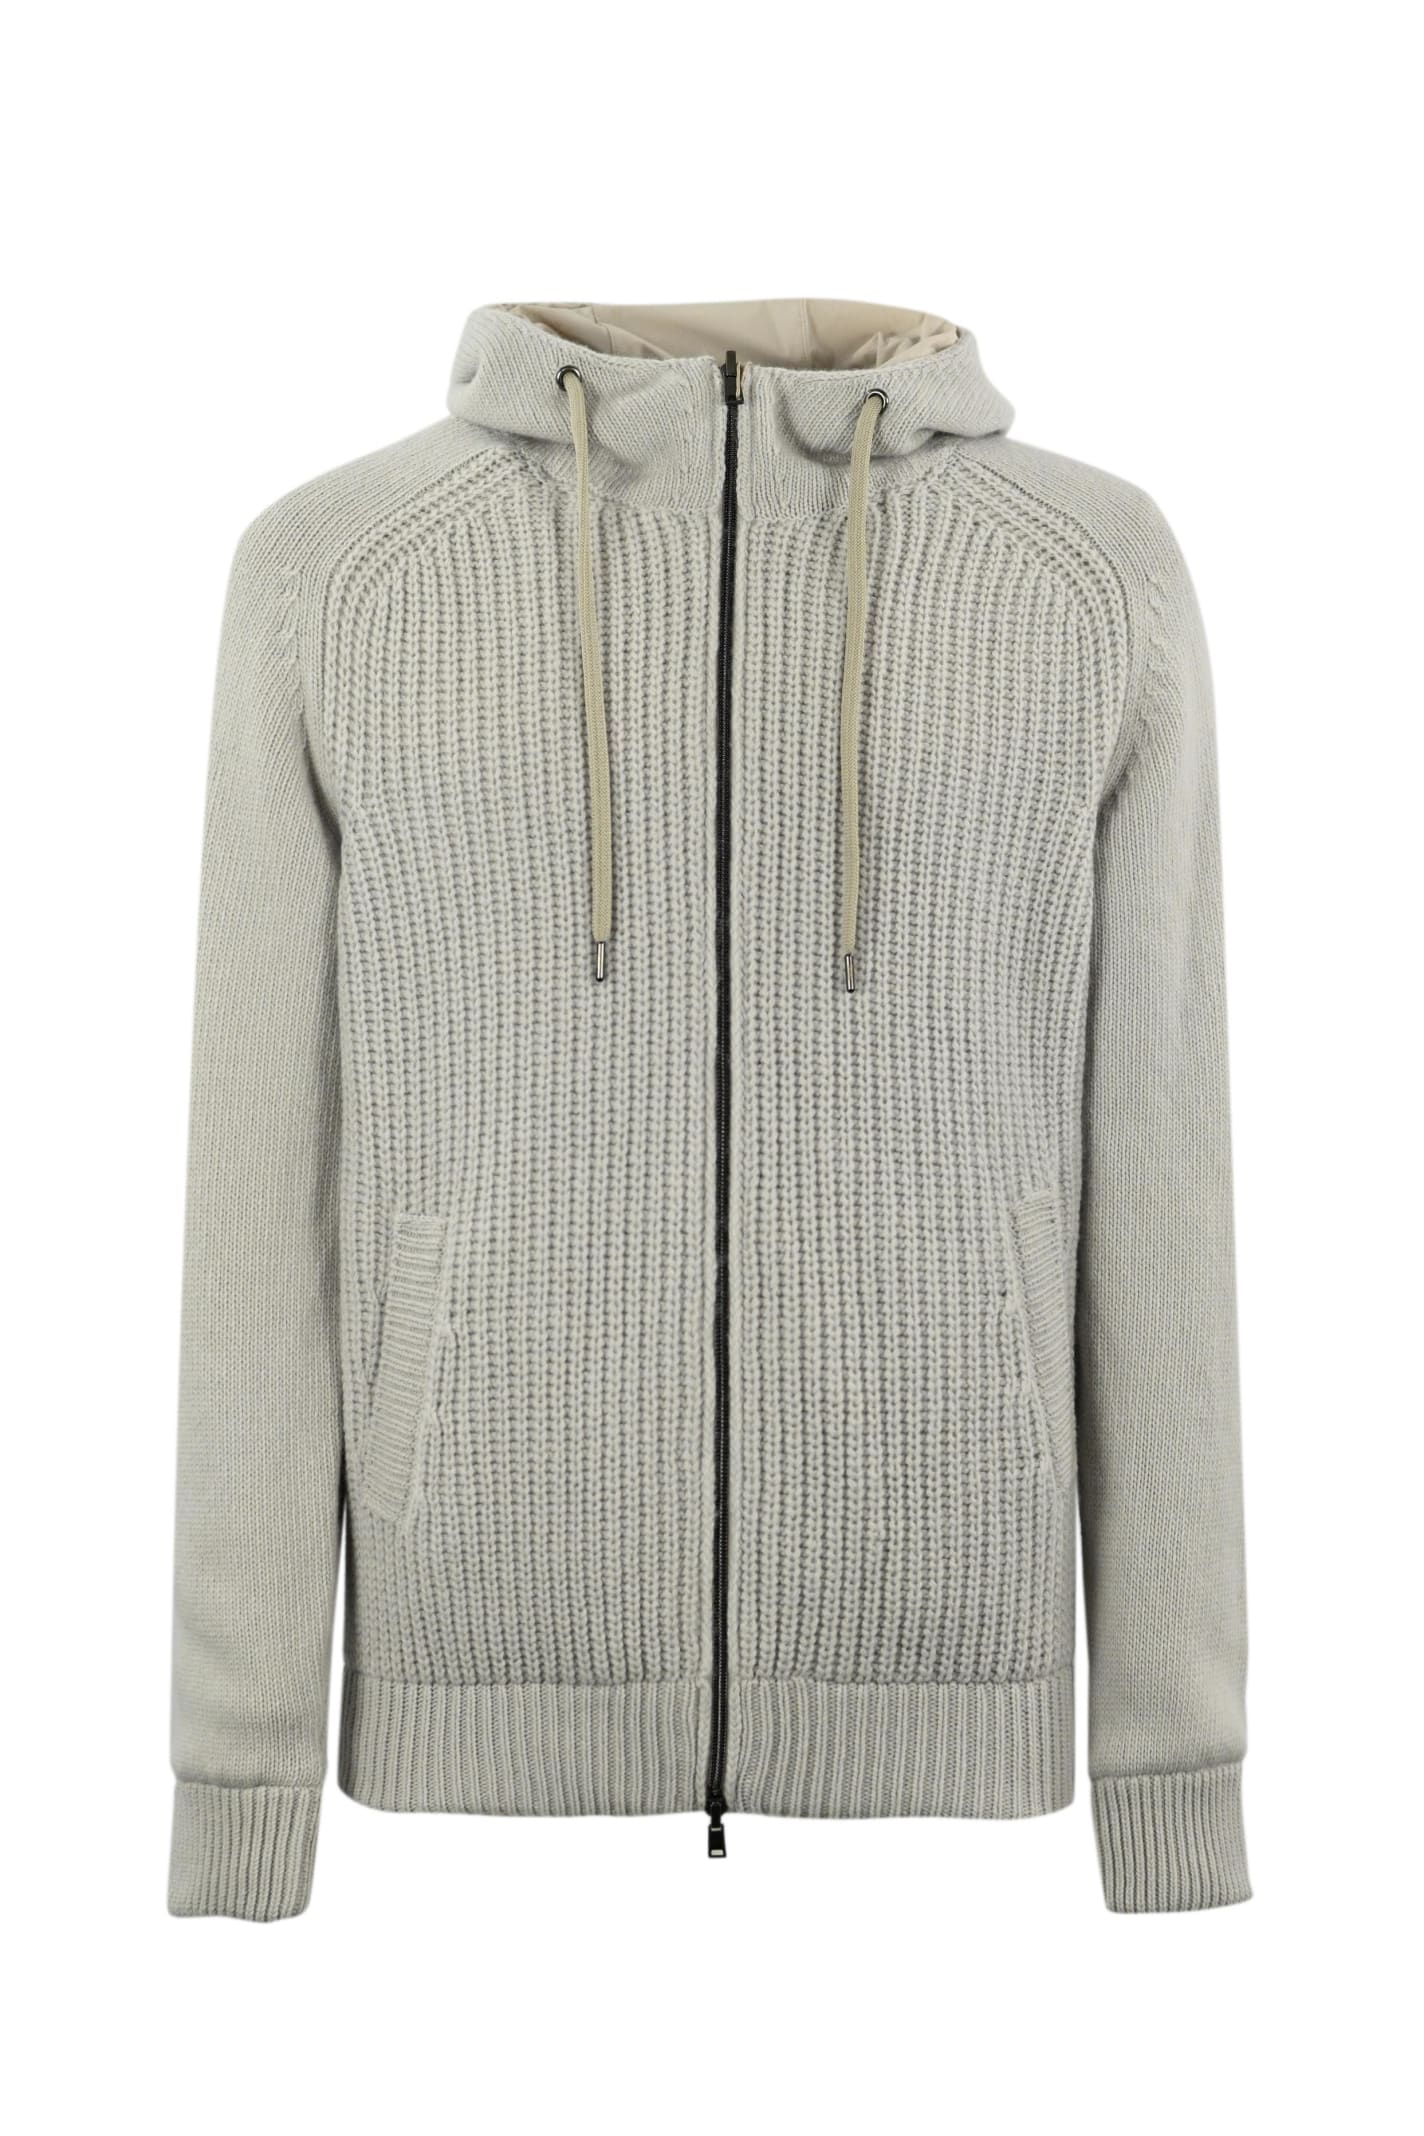 Herno Reversible Jacket-sweater In Gray